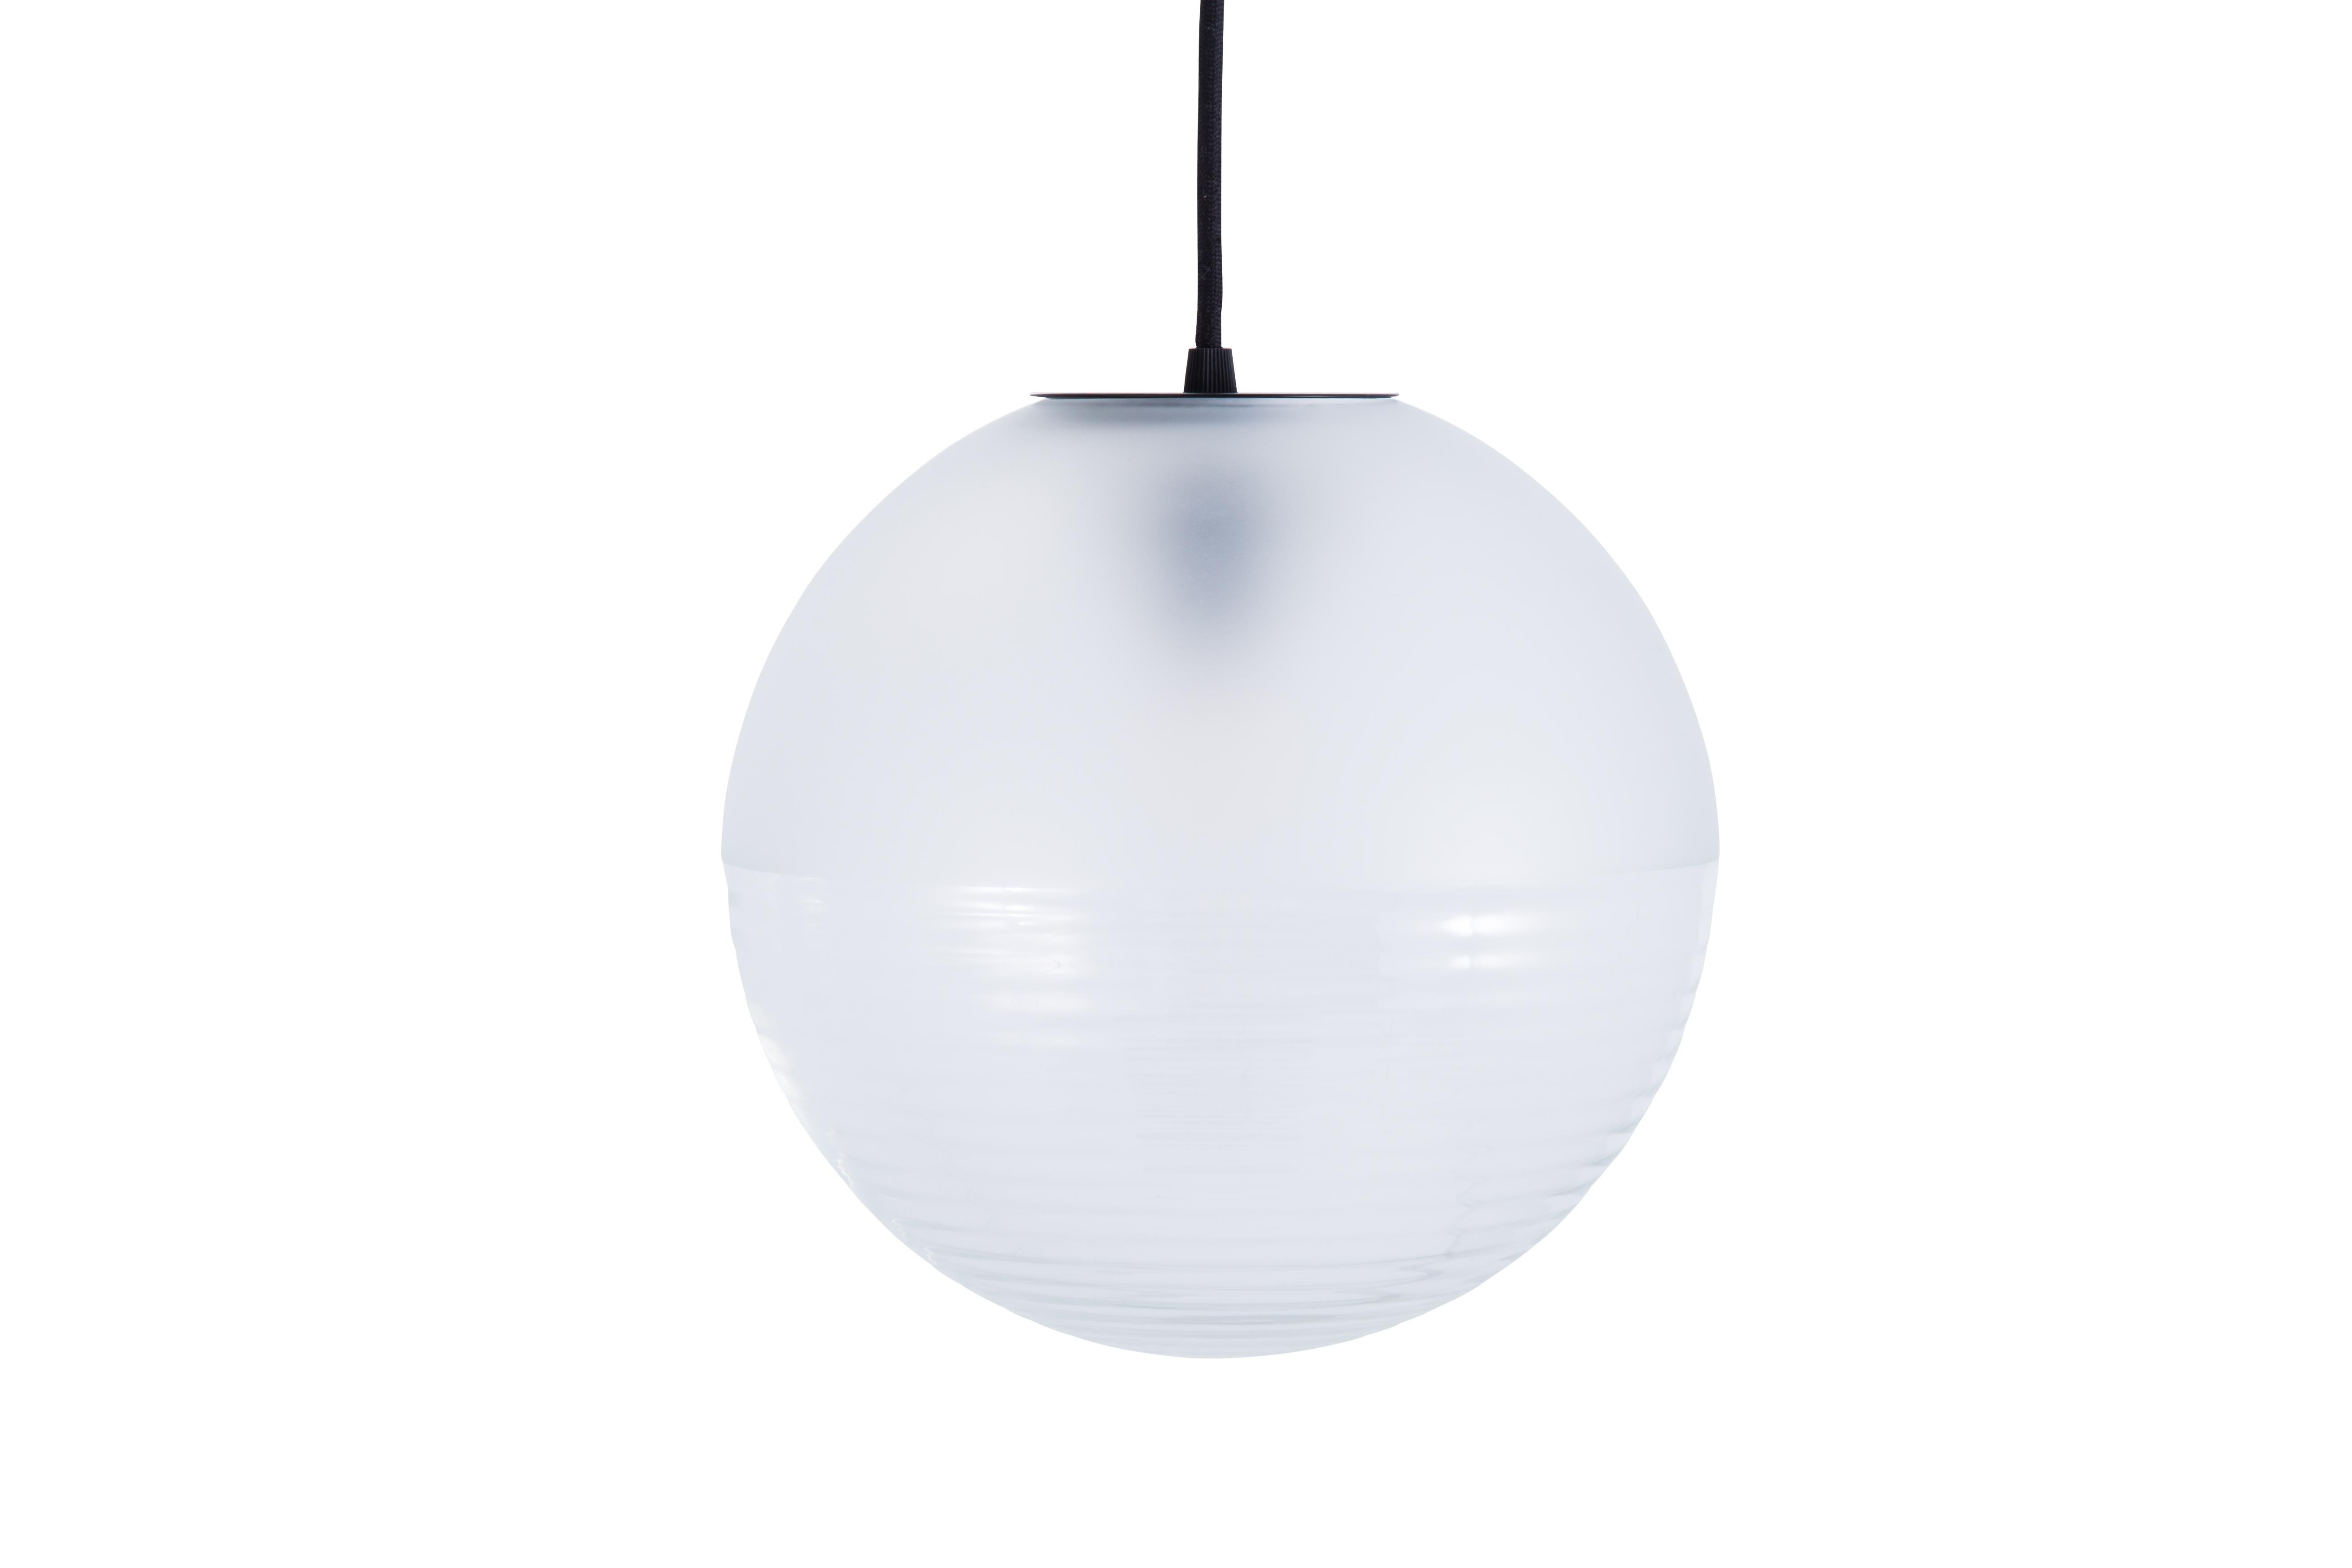 Stellar small transparent acetato transparent pendant by Pulpo
Dimensions: D23 x H320 cm
Materials: handblown glass coloured, stainless steel wire, textile cable.

Also available in different finishes: aubergine acetato aubergine, smoky grey